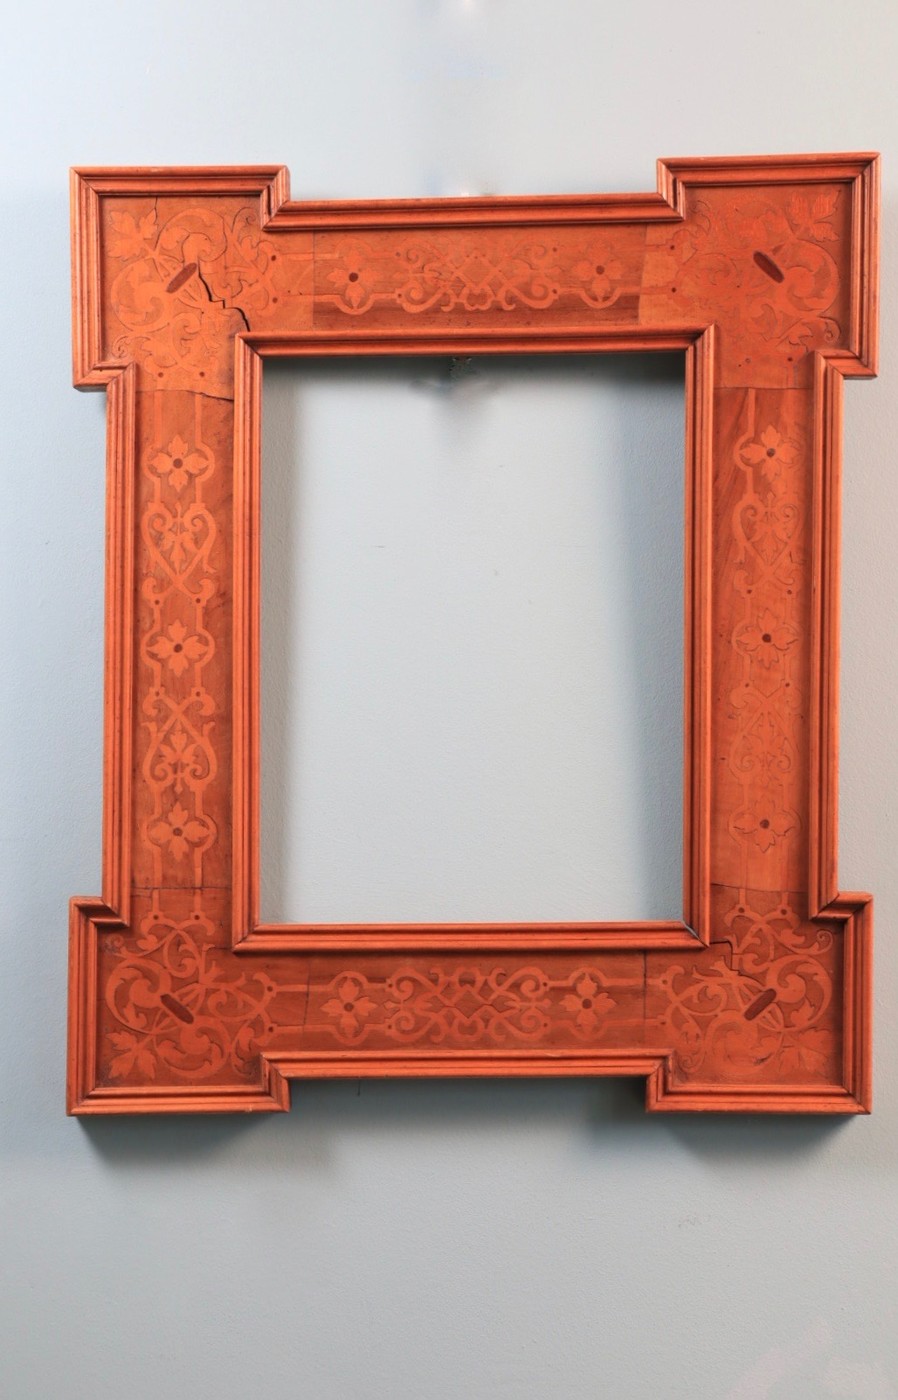 Pair of wooden inlaid frames 19th century